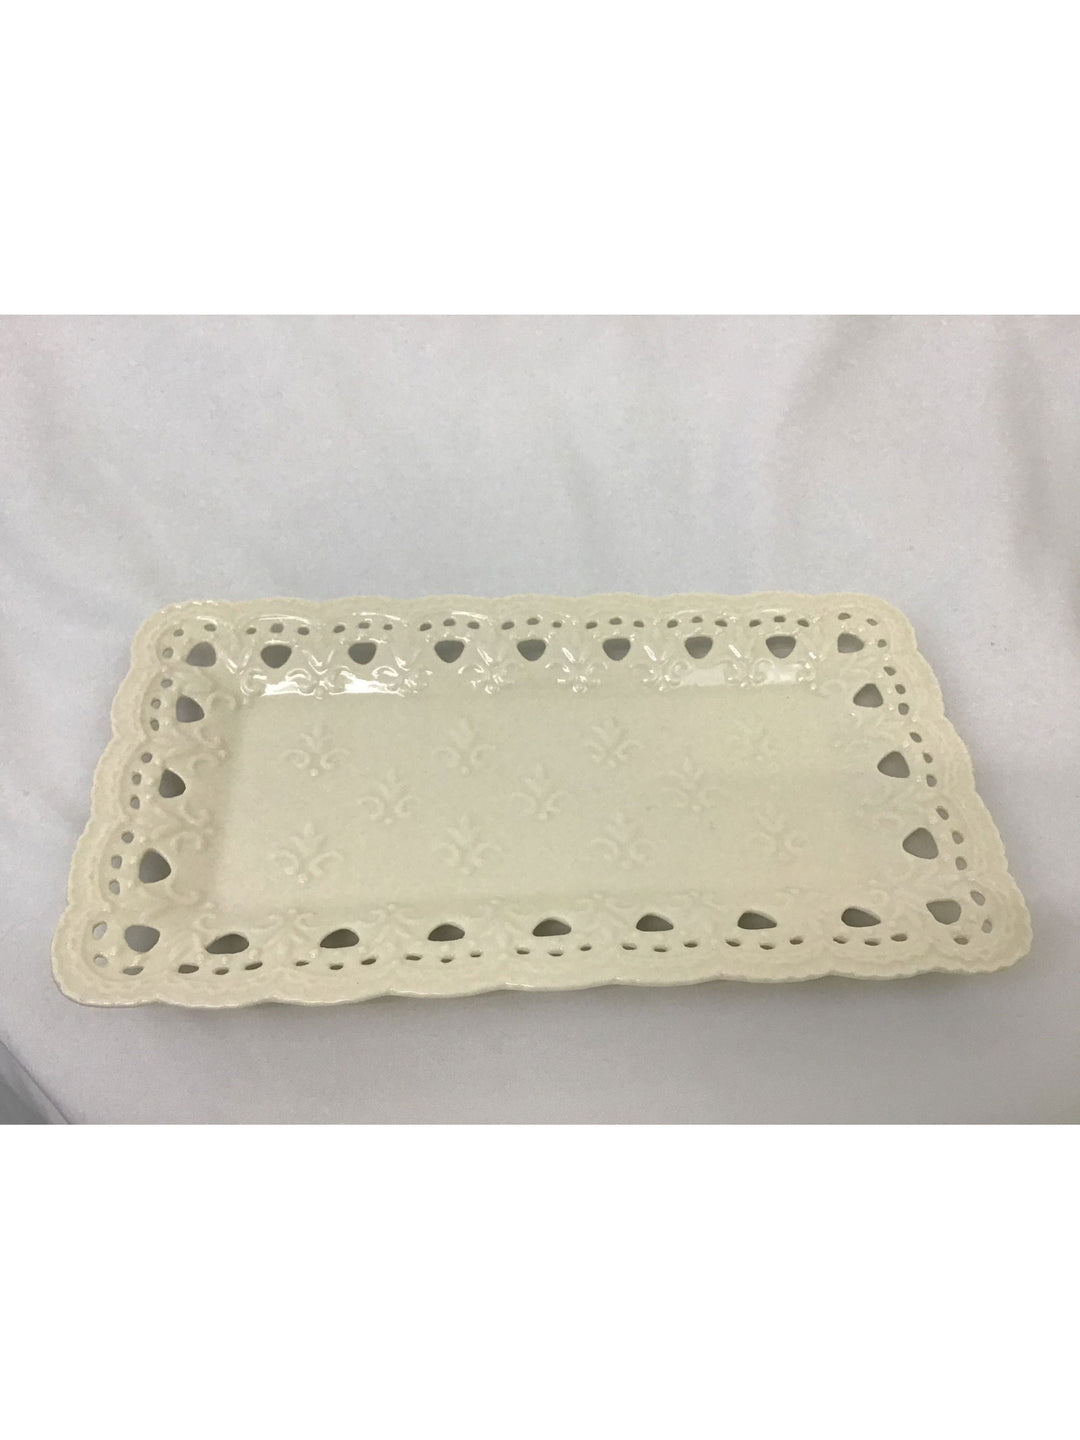 Skye Mcghie Rectangular Cream Lace Tray - The Kennedy Collective Thrift - 